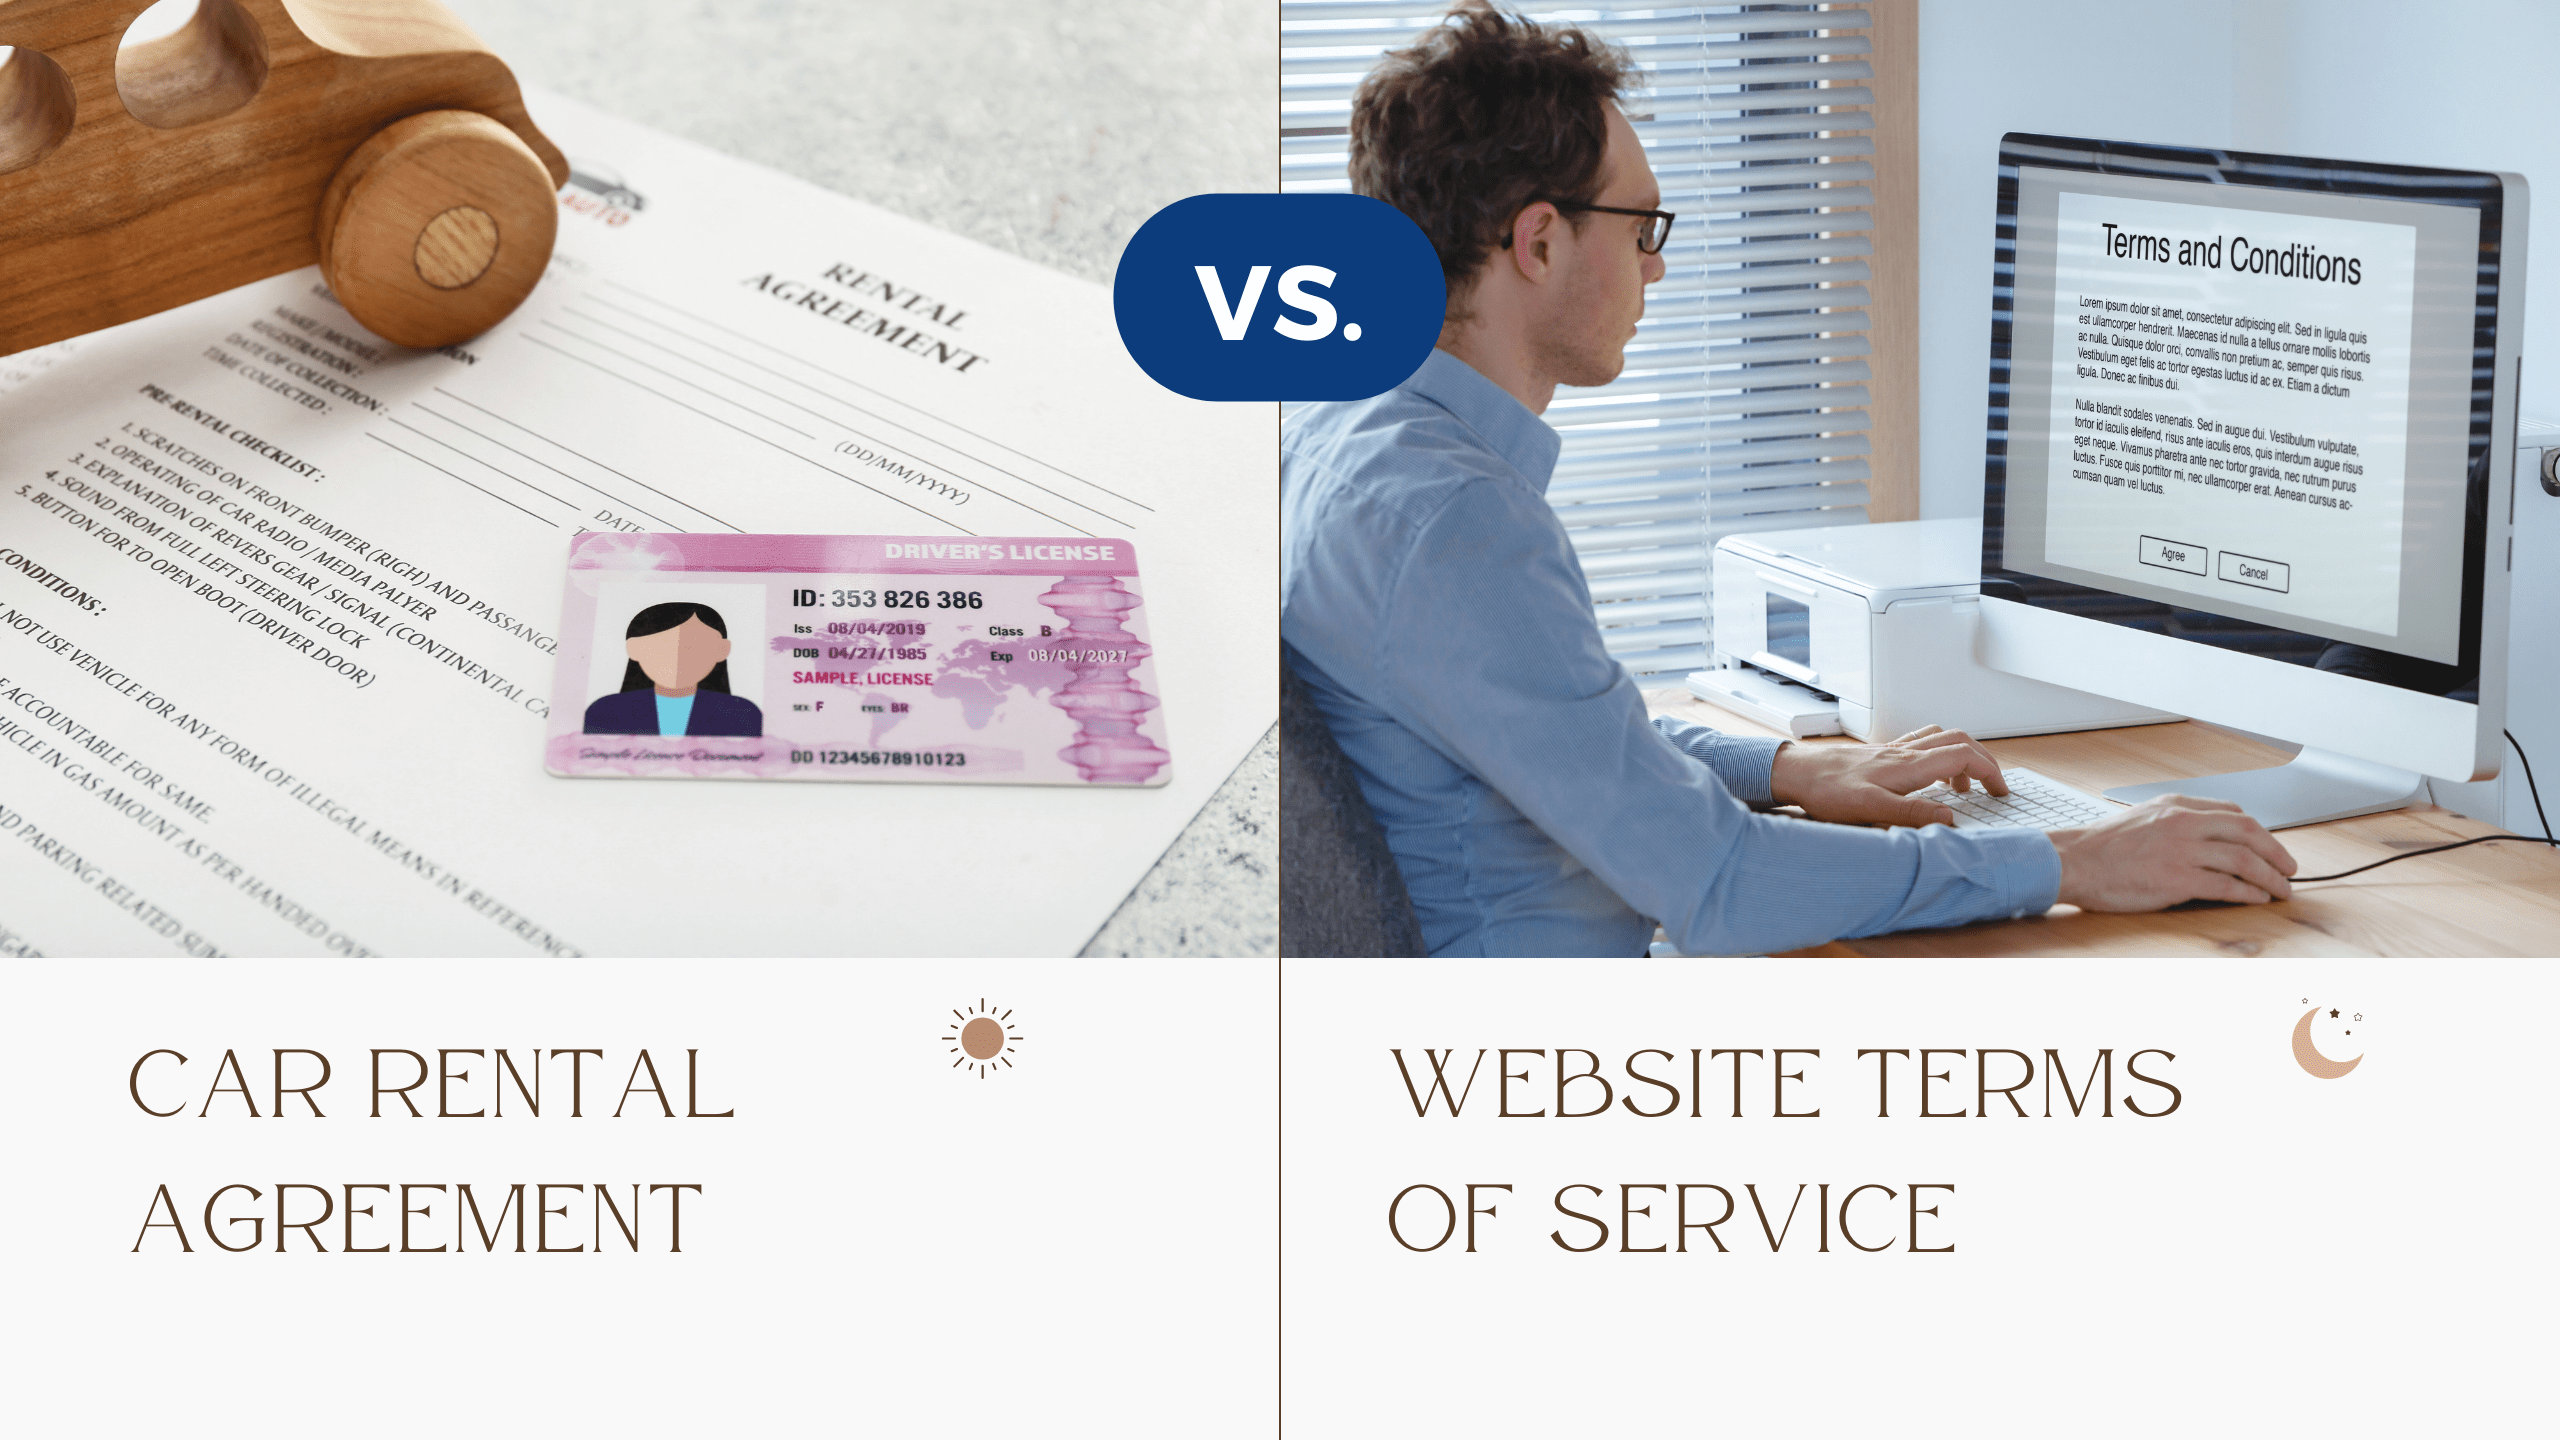 Car Rental Agreement vs. Website Terms of Service the Difference